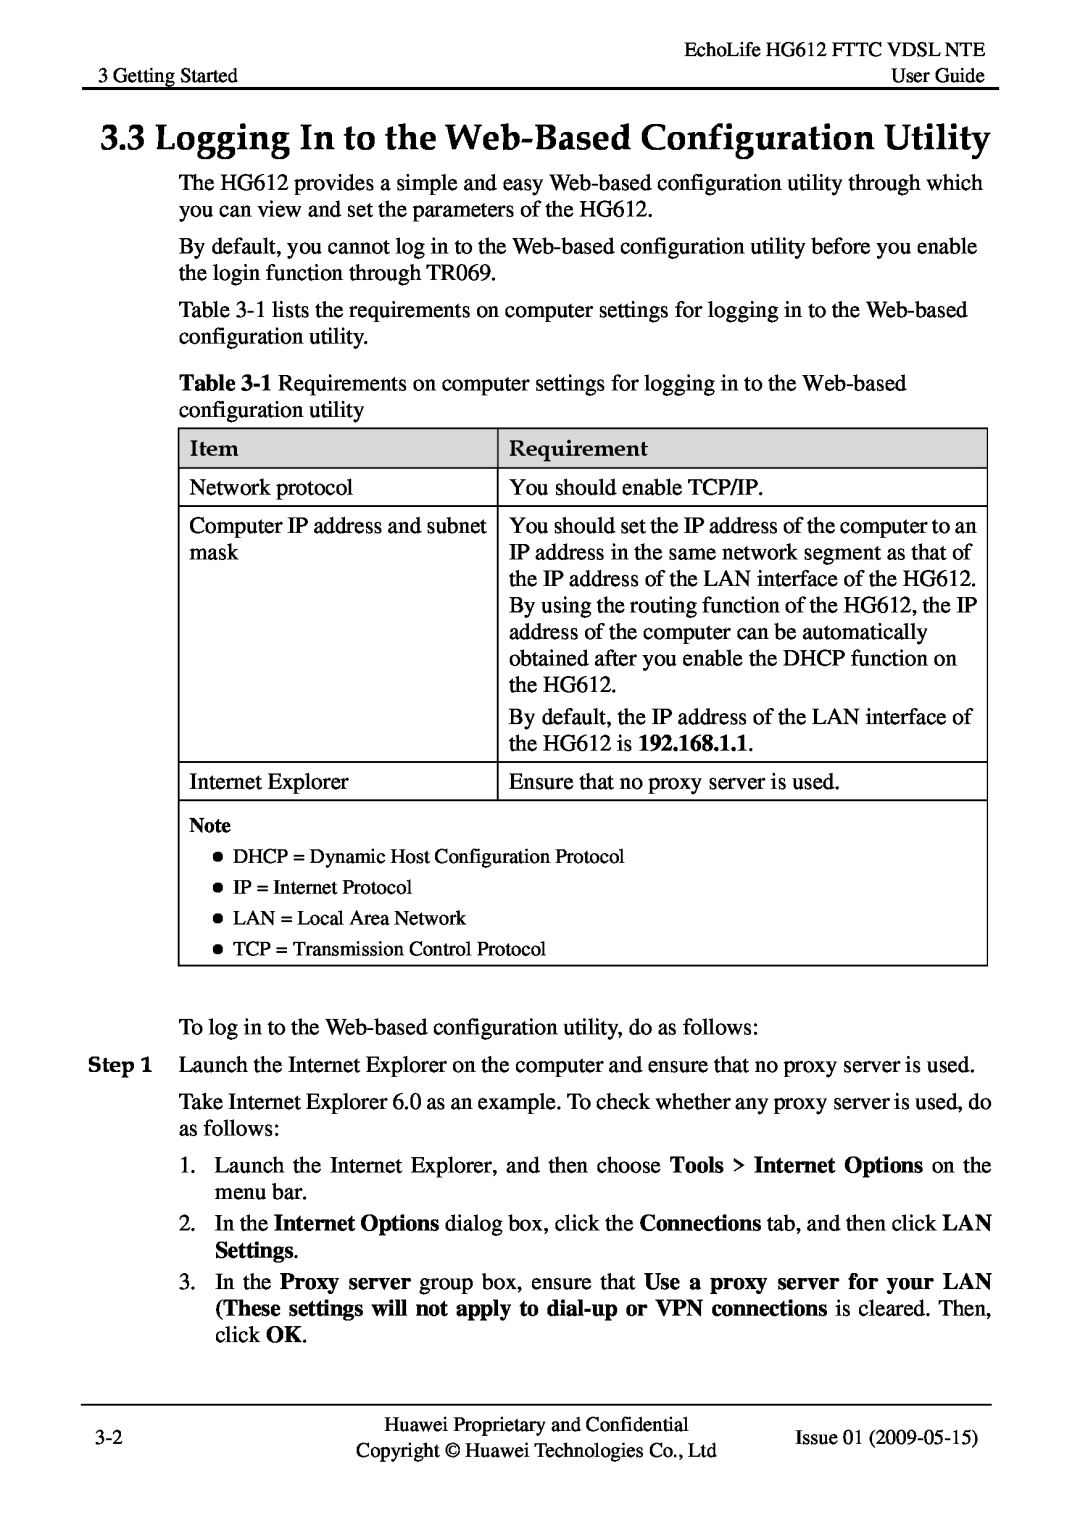 Huawei HG612FTTC VDSL NTE manual Logging In to the Web-Based Configuration Utility, Requirement 